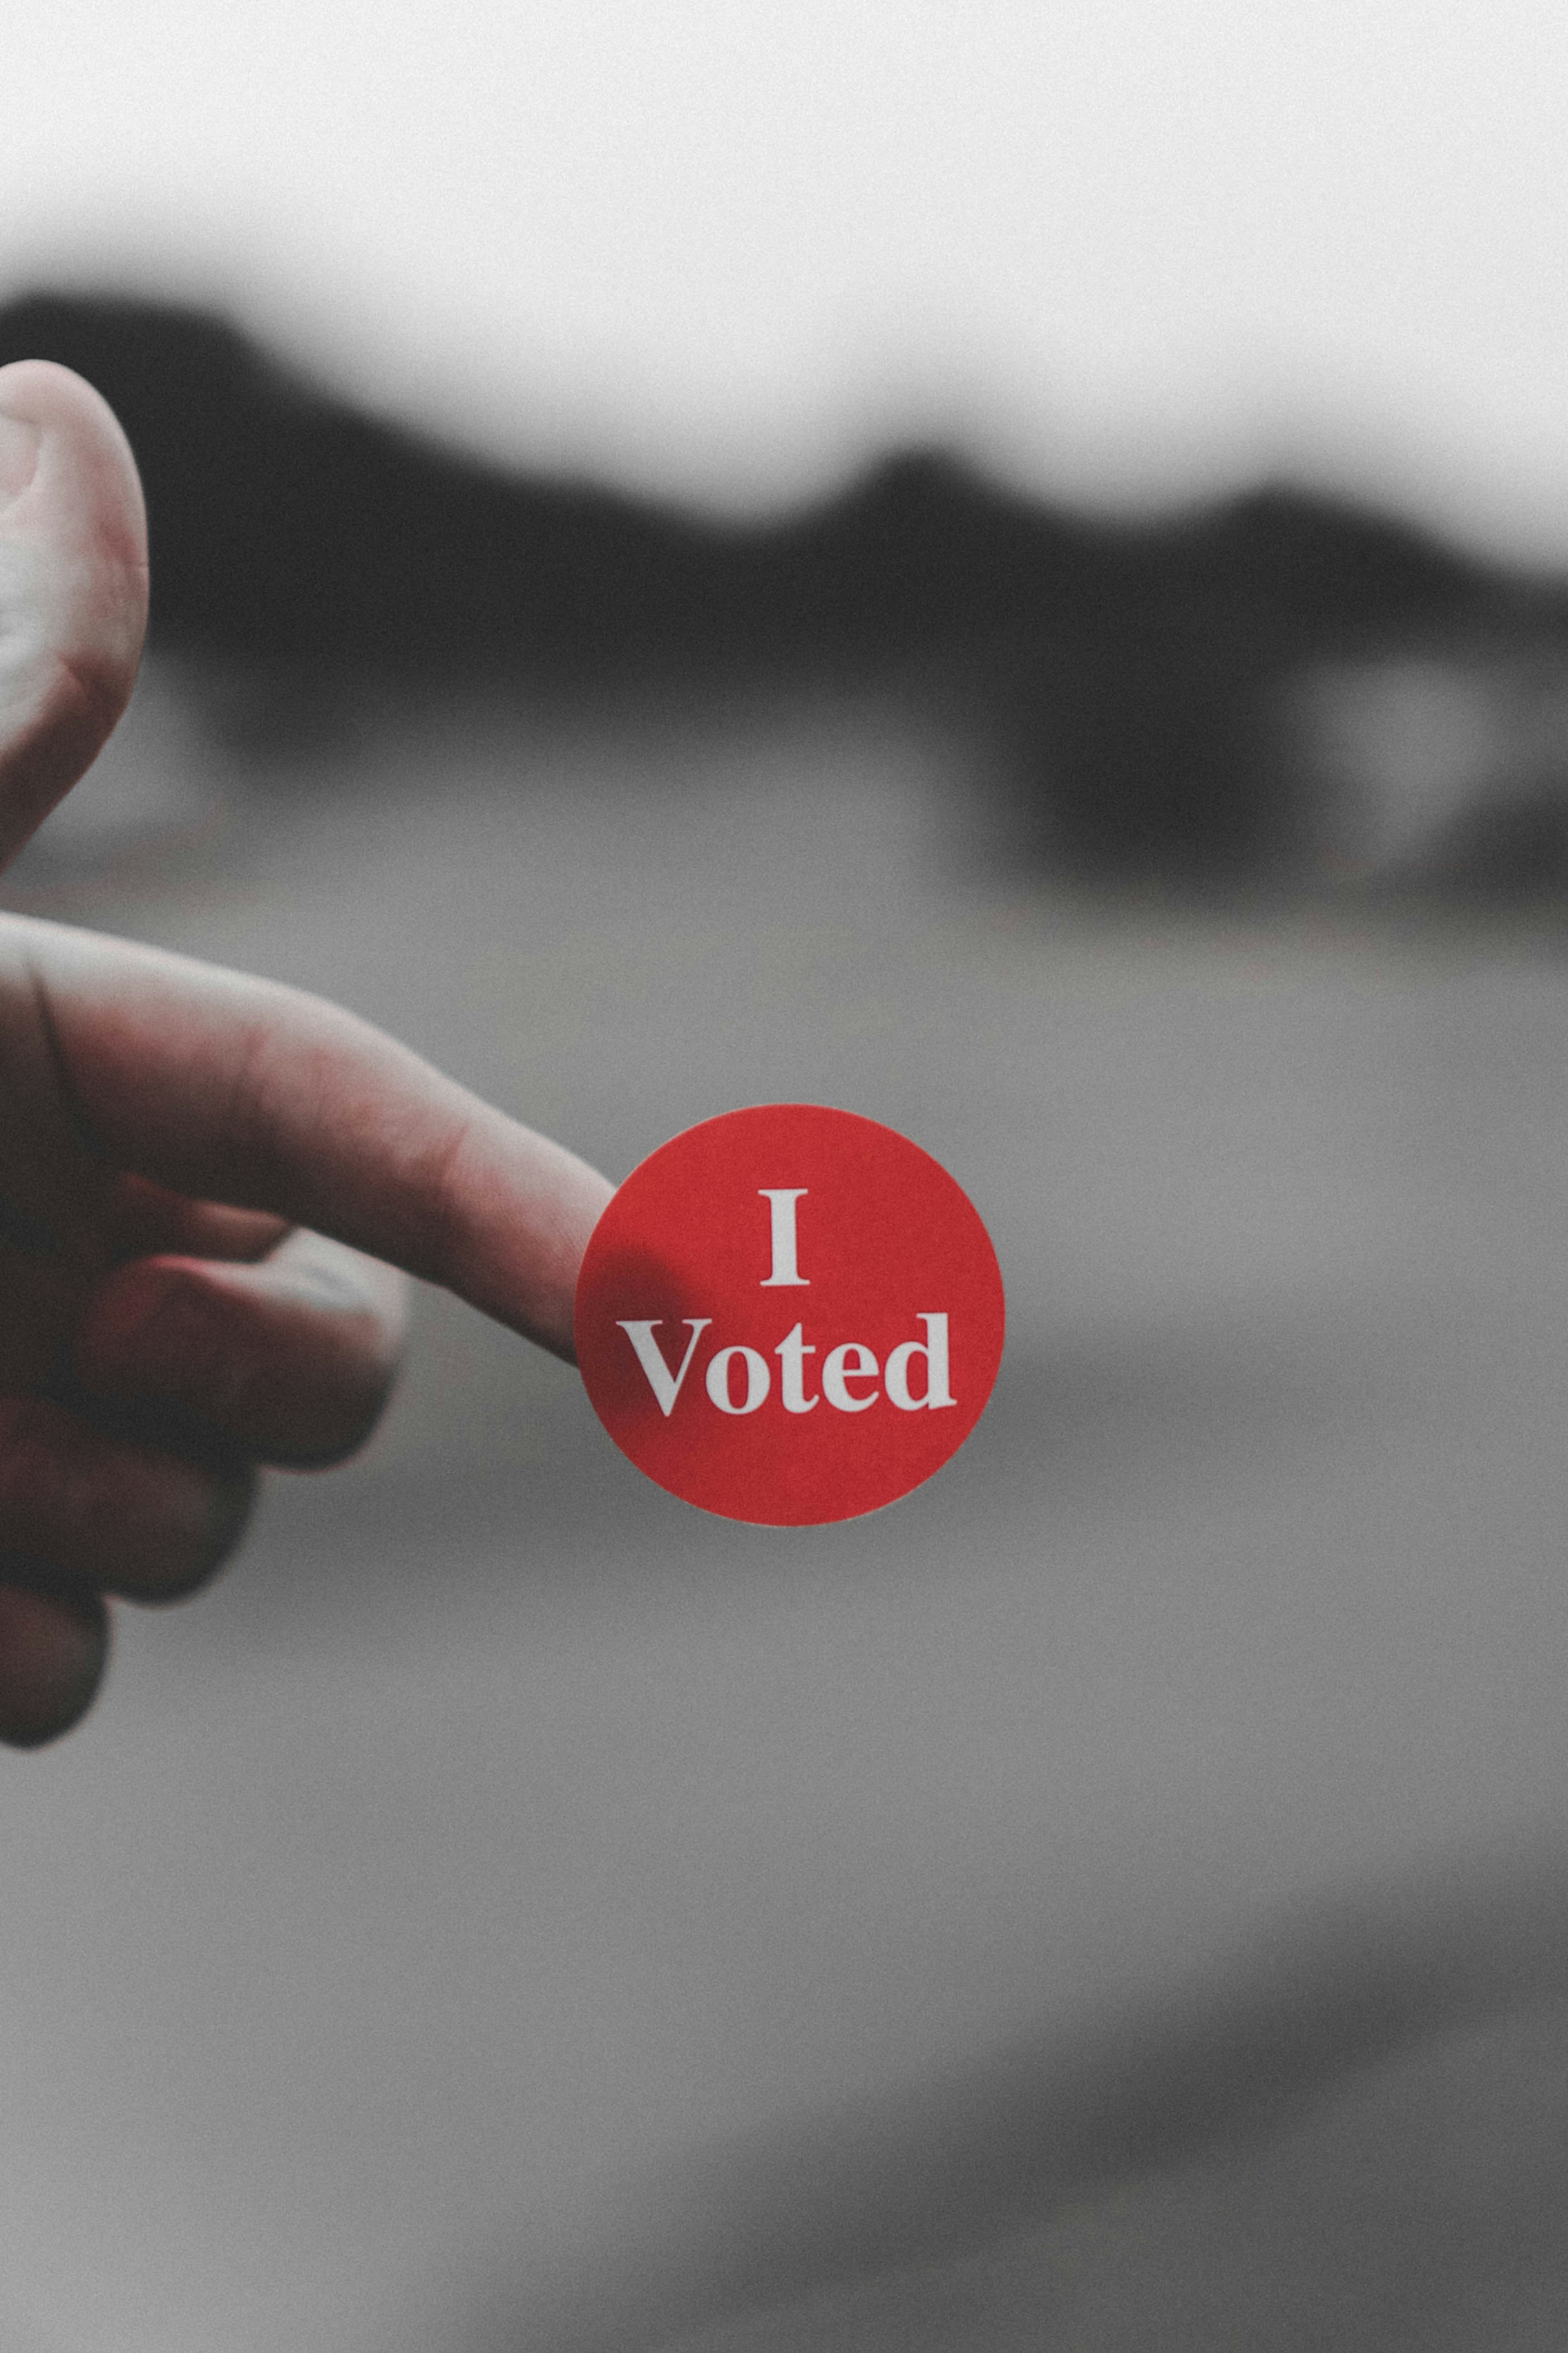 A red sticker with 'I Voted' written in white writing is attached to a finger. The background behind is blurred showing a road.